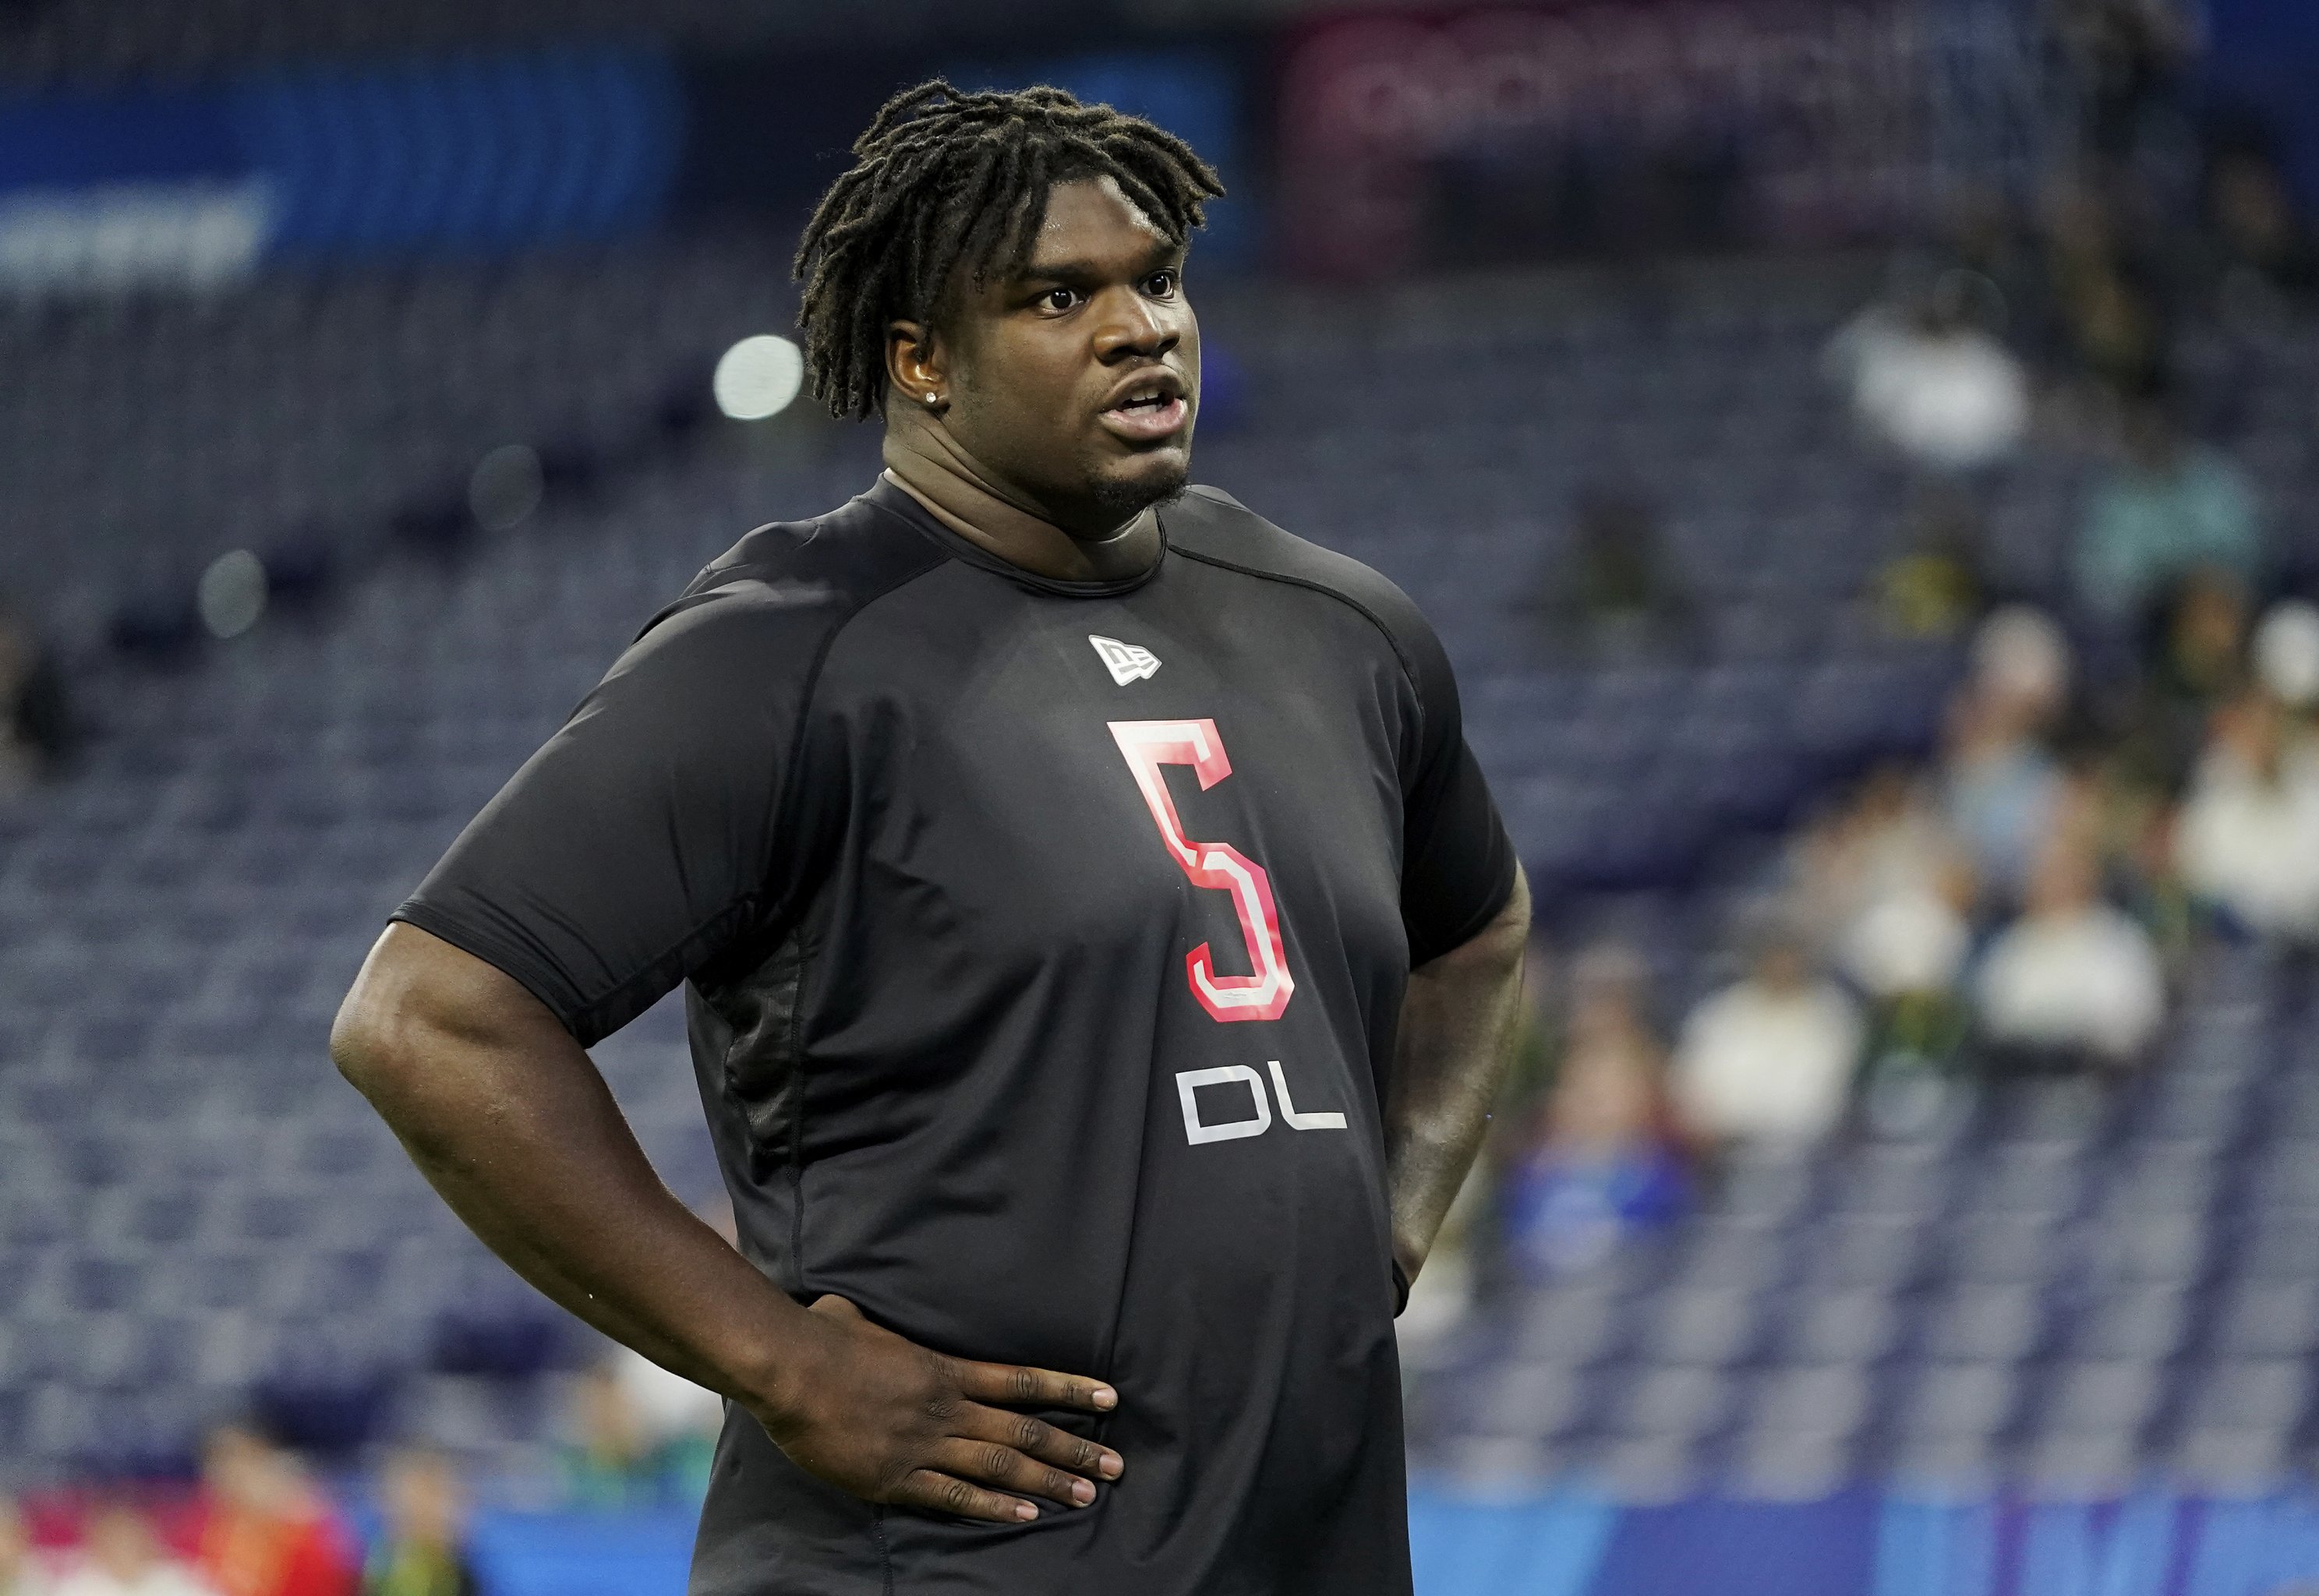 2022 NFL Scouting Combine shows that there are plenty of players